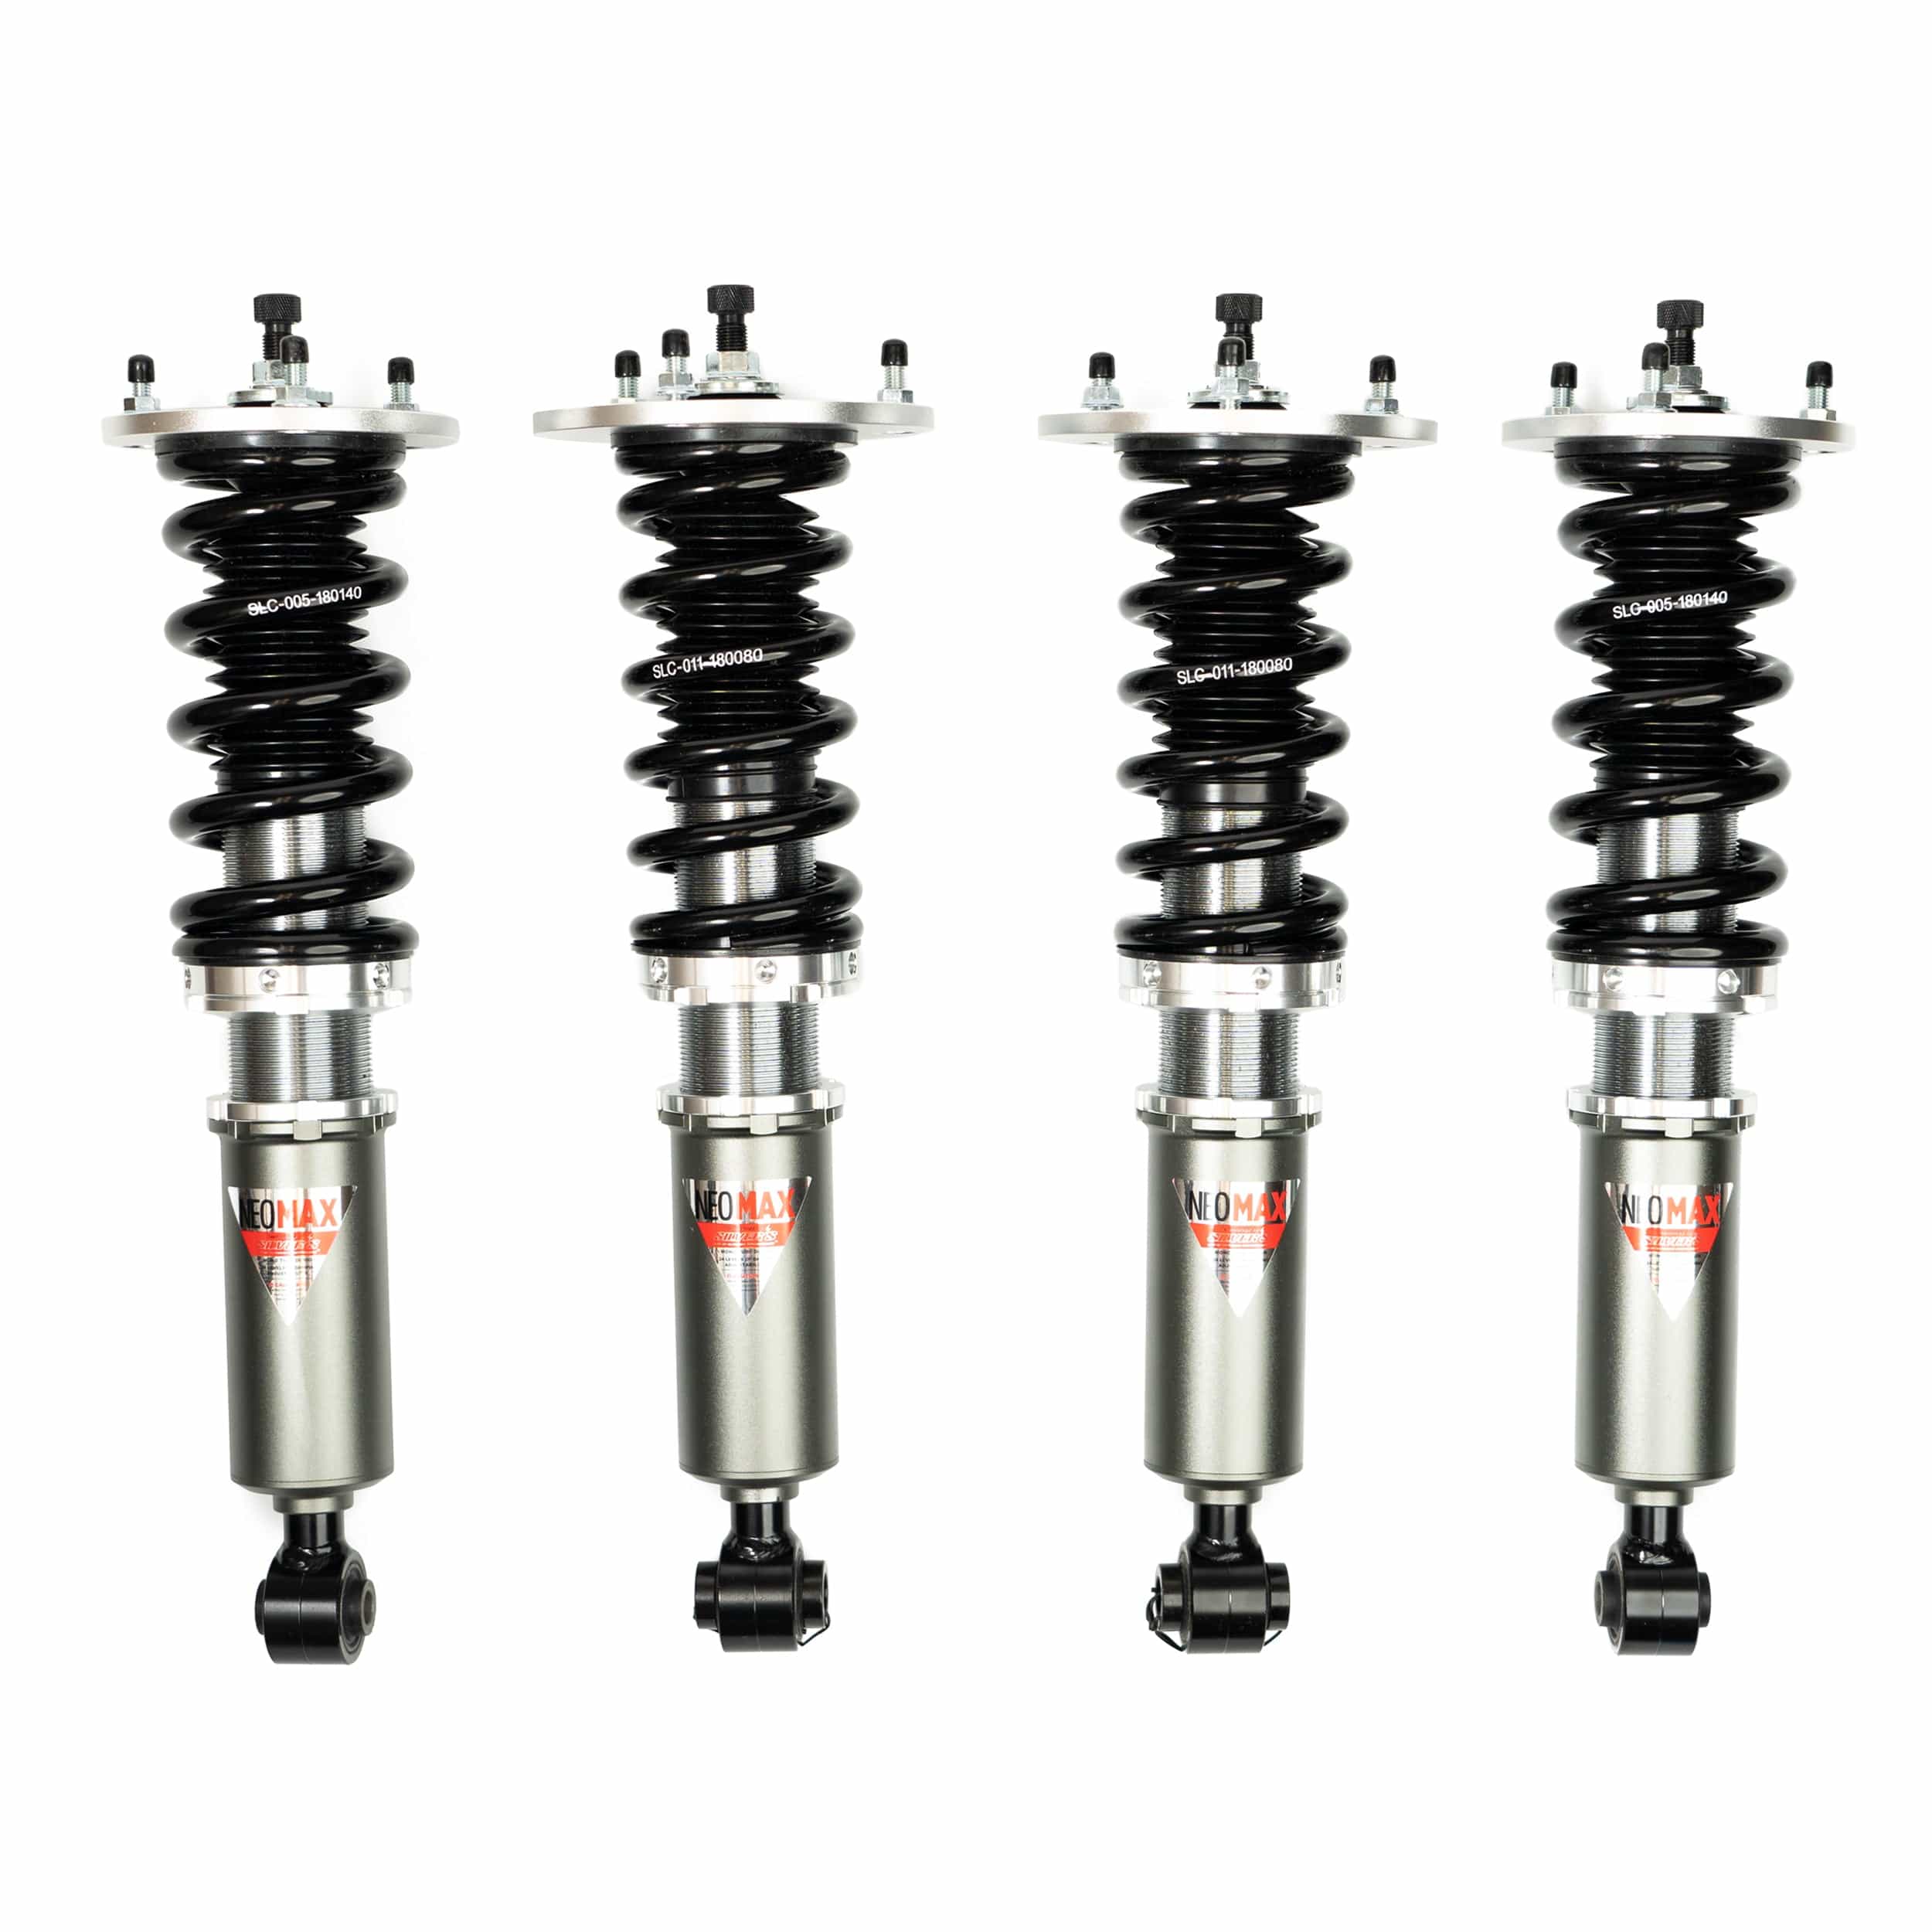 Silvers NEOMAX Coilovers for 1992-2001 Toyota Chaser (JZX100/90)